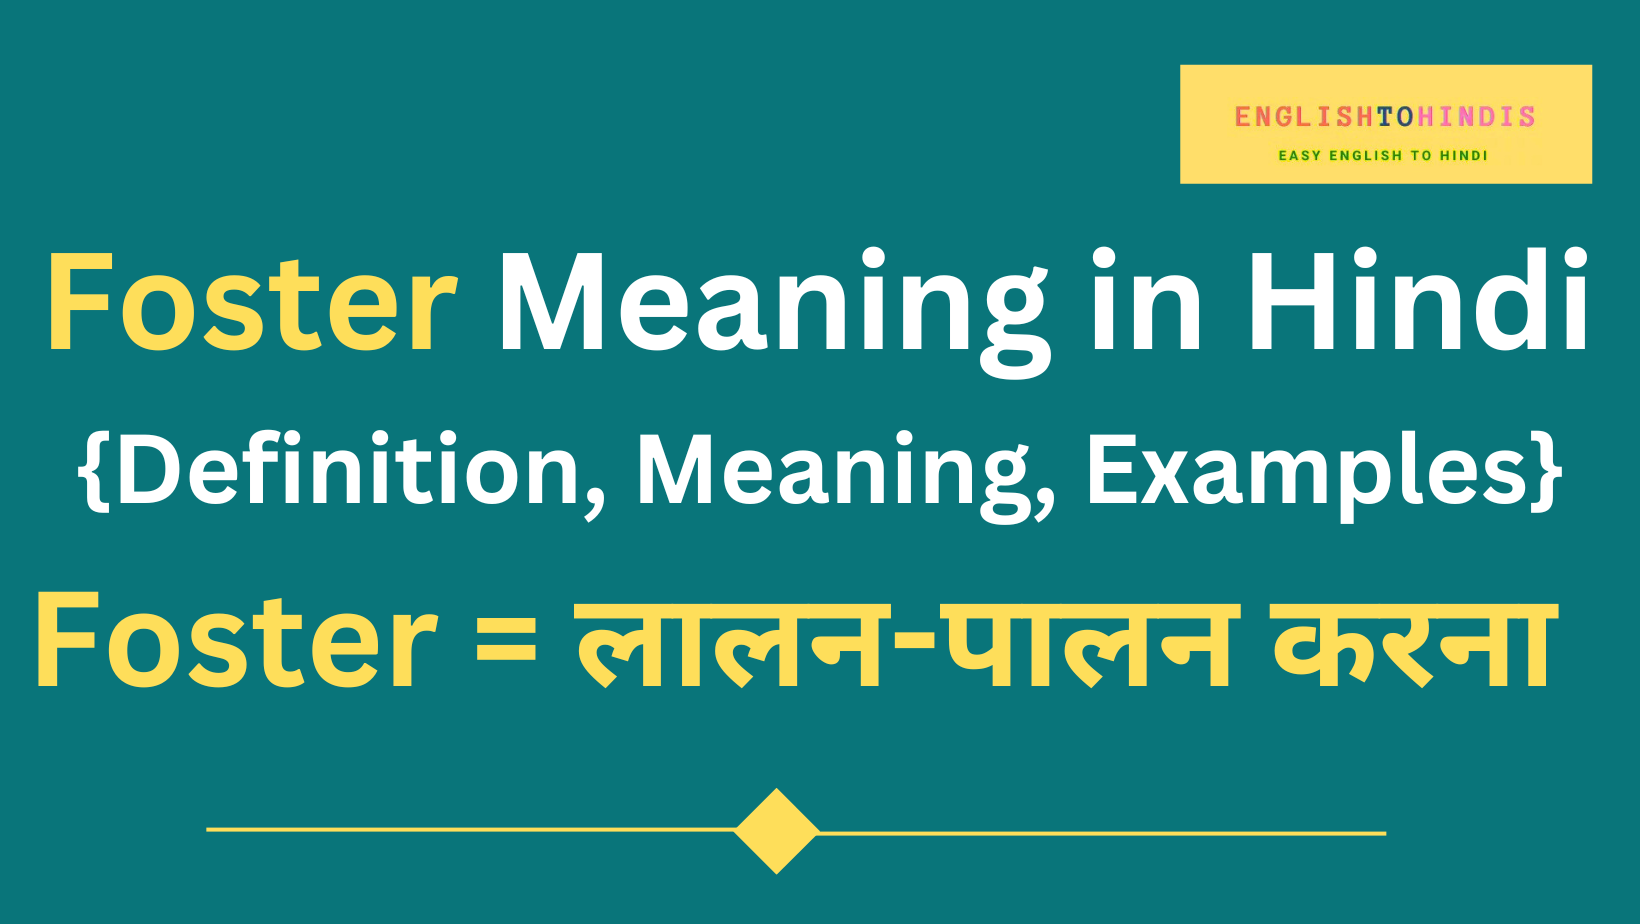 Foster Meaning in Hindi